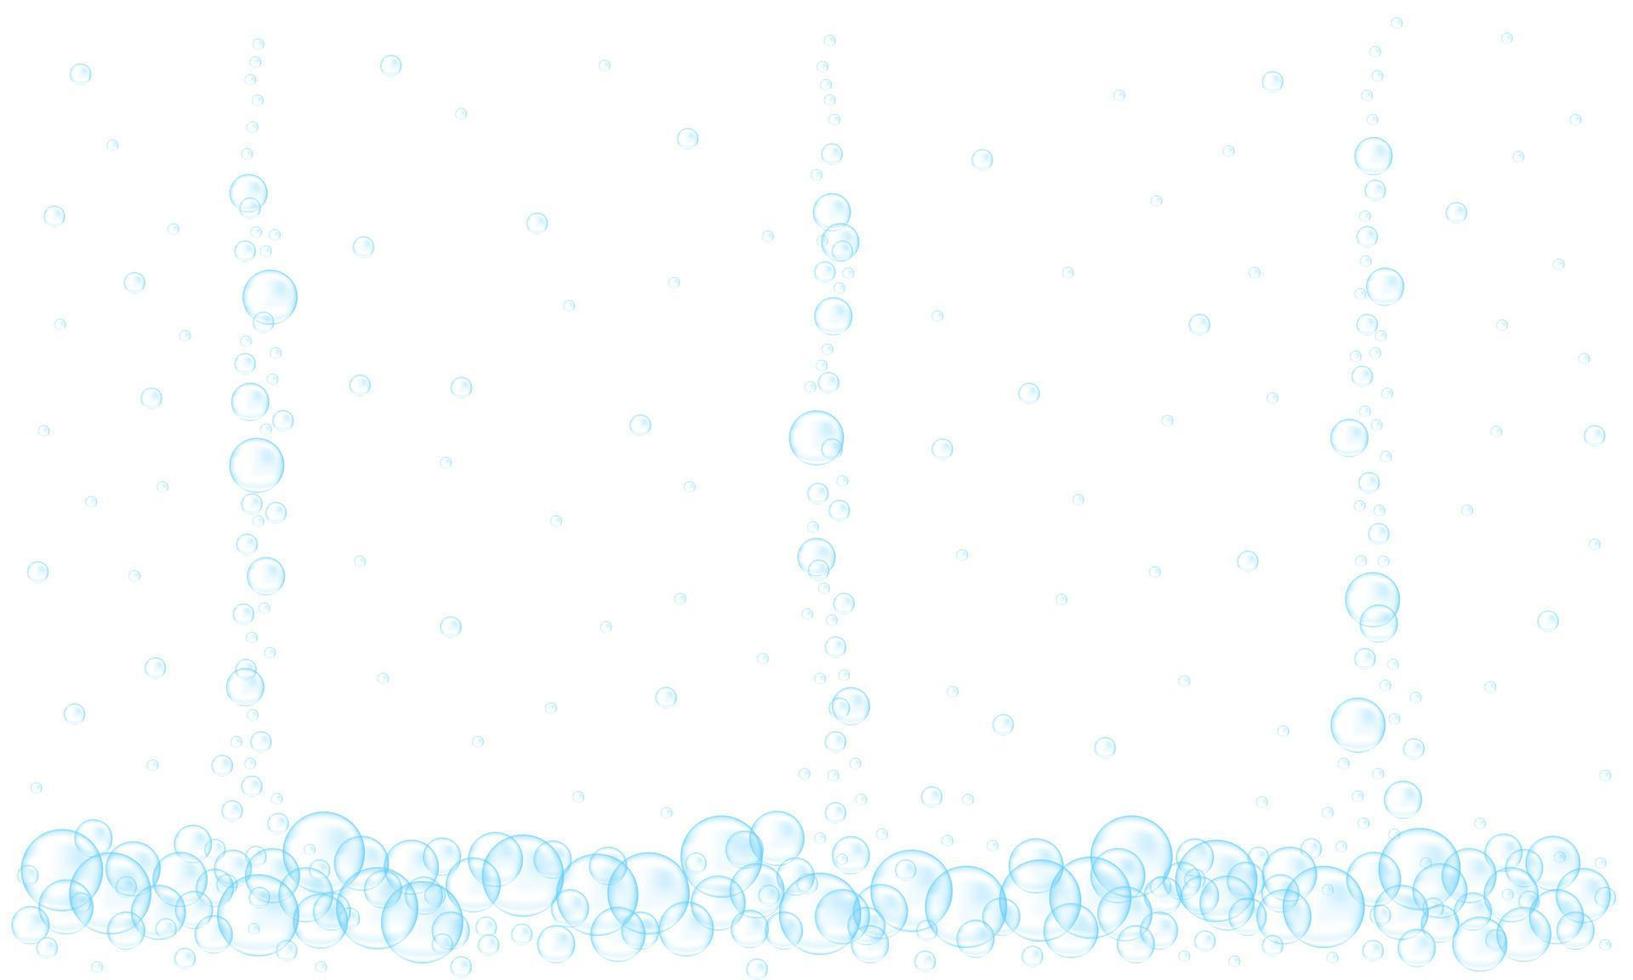 Blue underwater bubbles isolated on white background. Fizzy carbonated drink, soap suds, sea foam, aquarium water stream texture vector